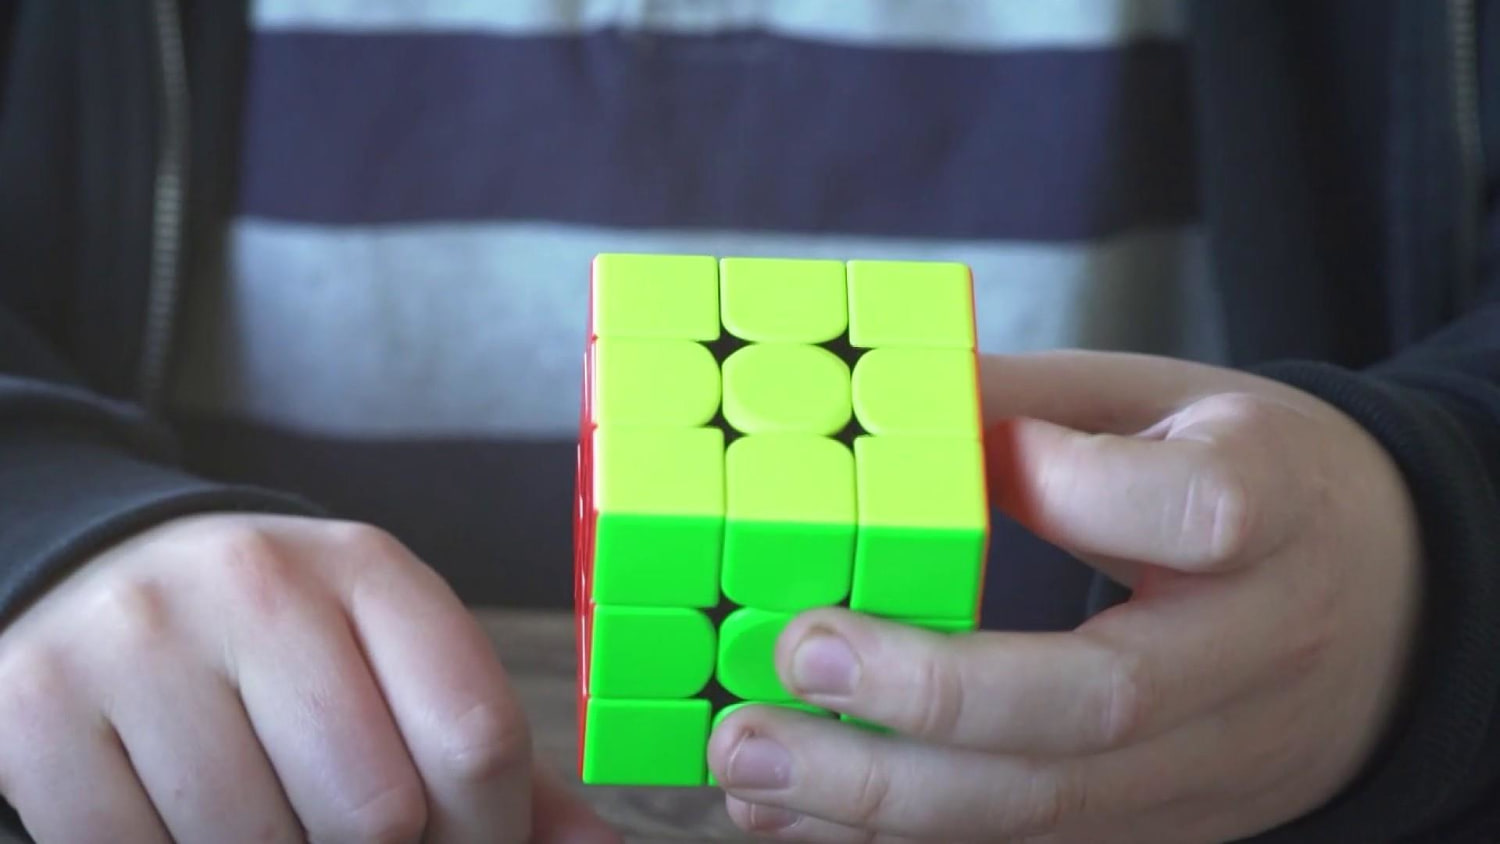 New algorithm solves a Rubik's Cube faster than any human